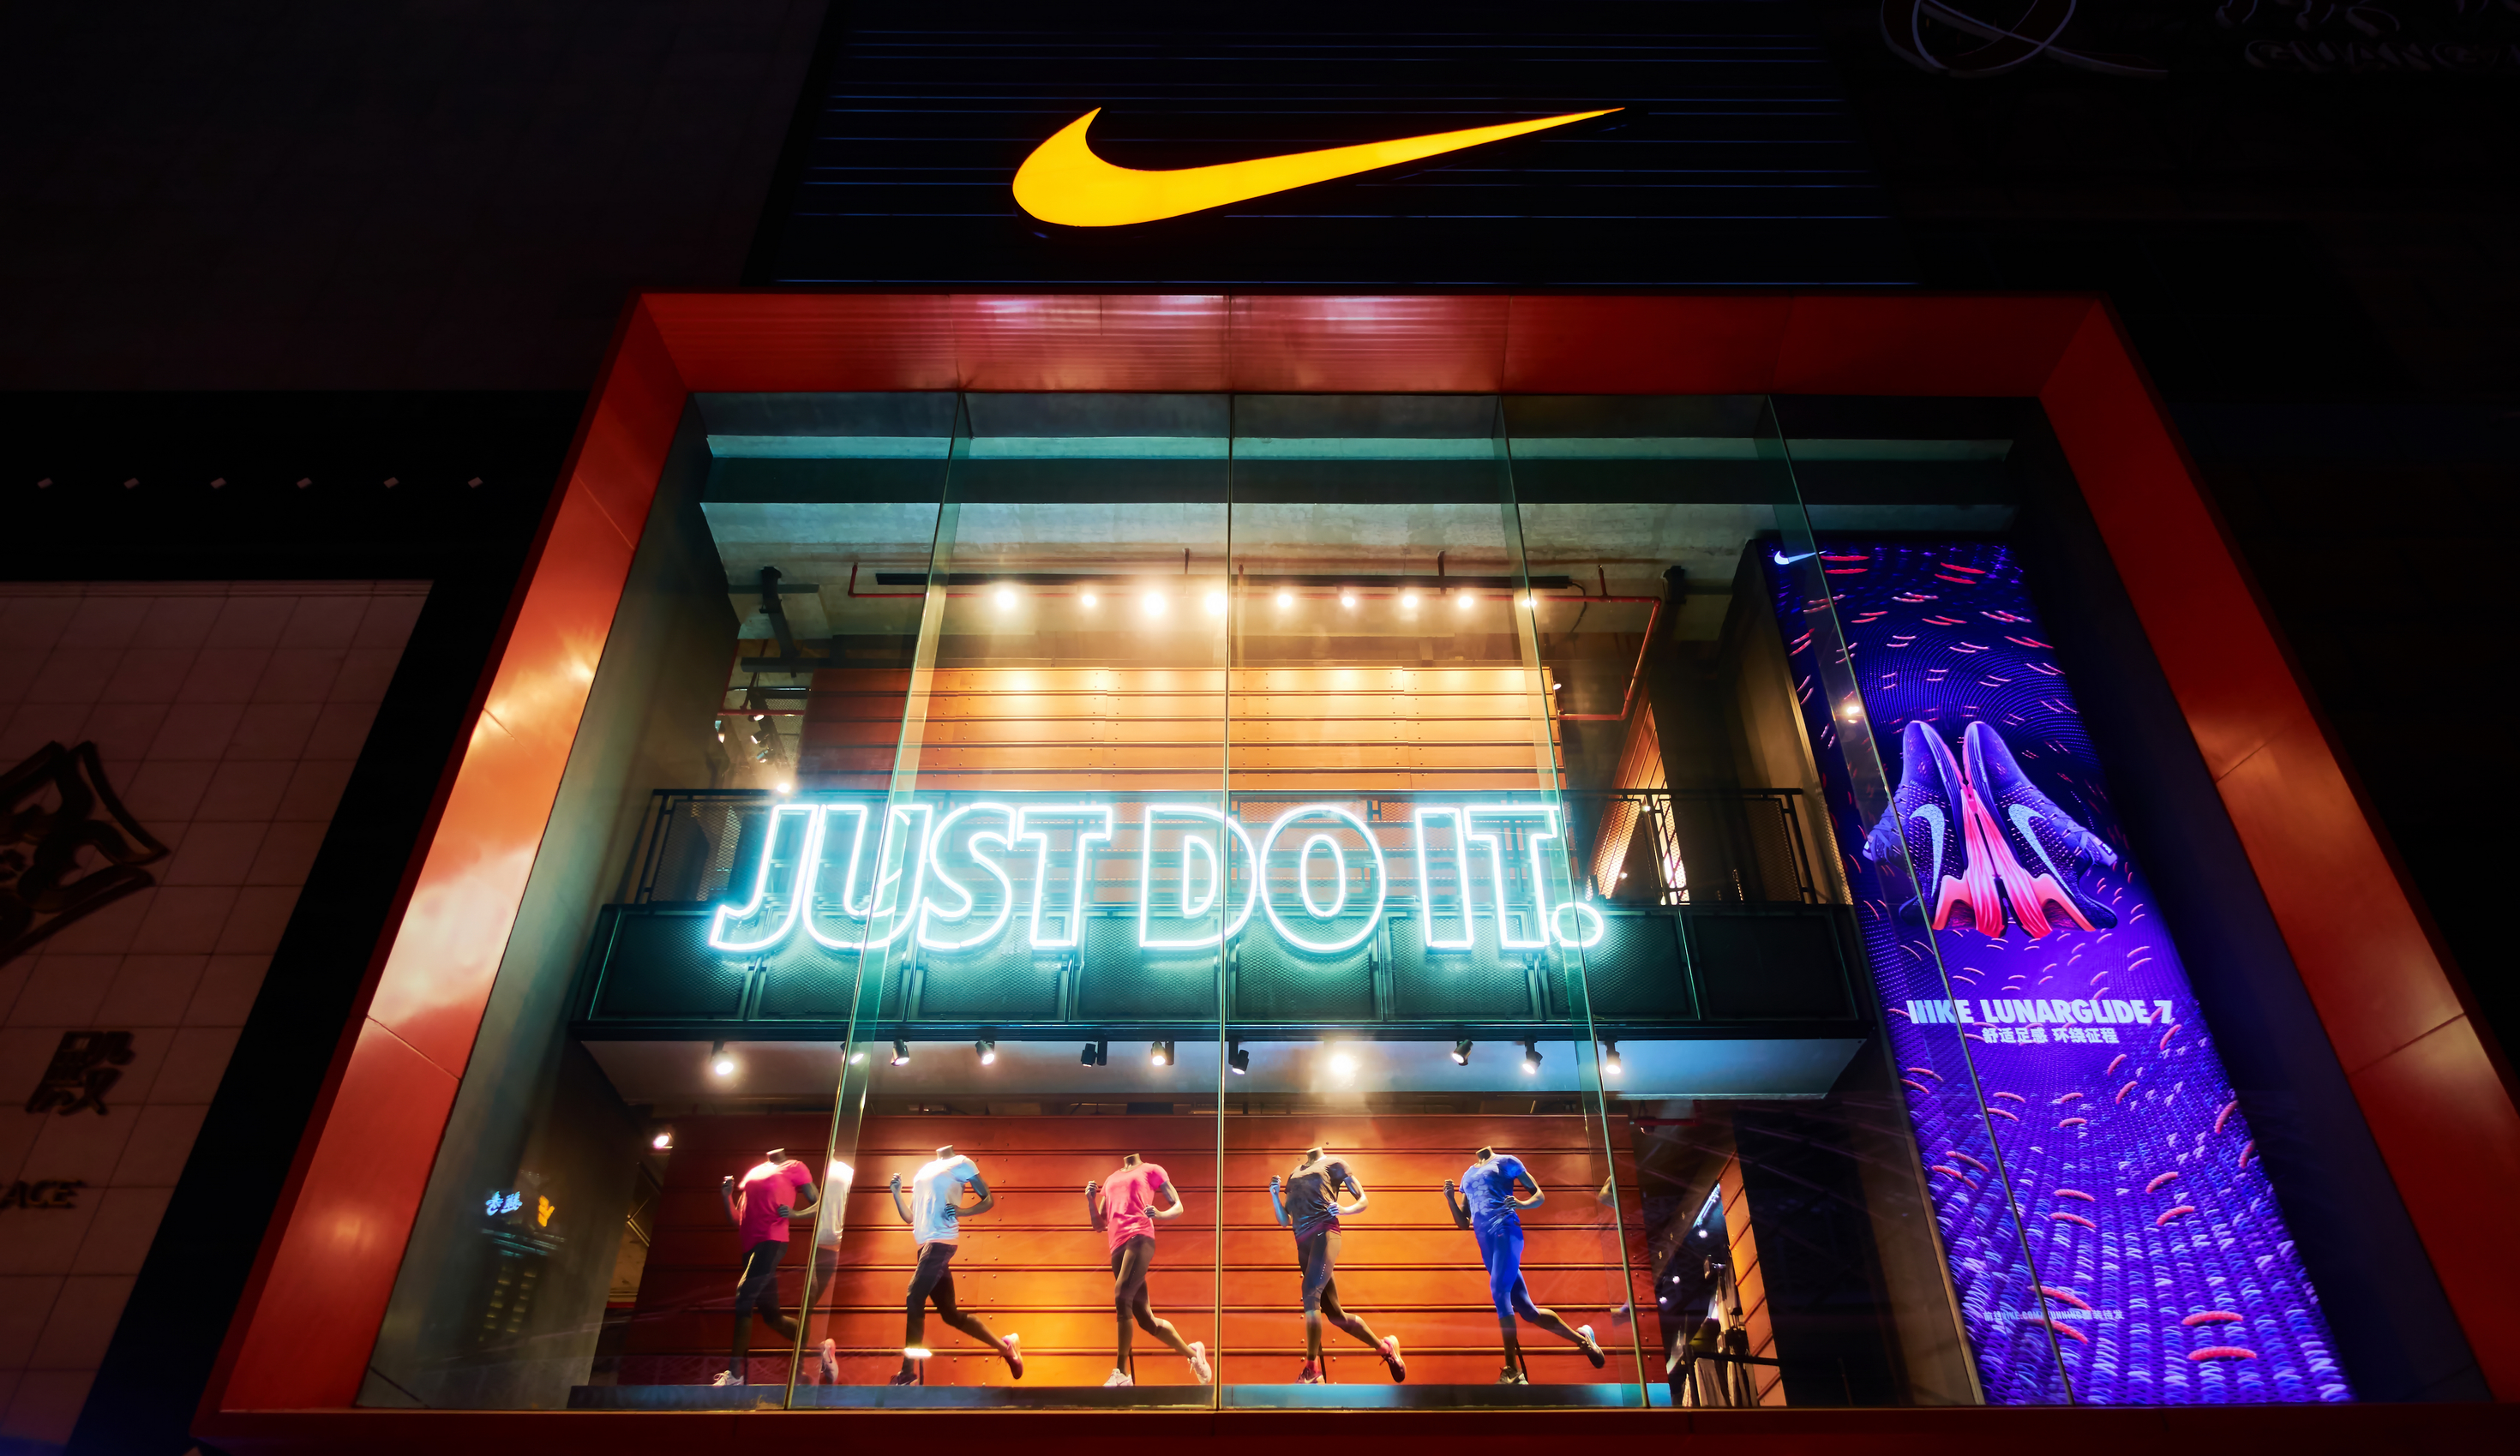 Nike promo codes: Members get up to 50% off and take 20% off select styles